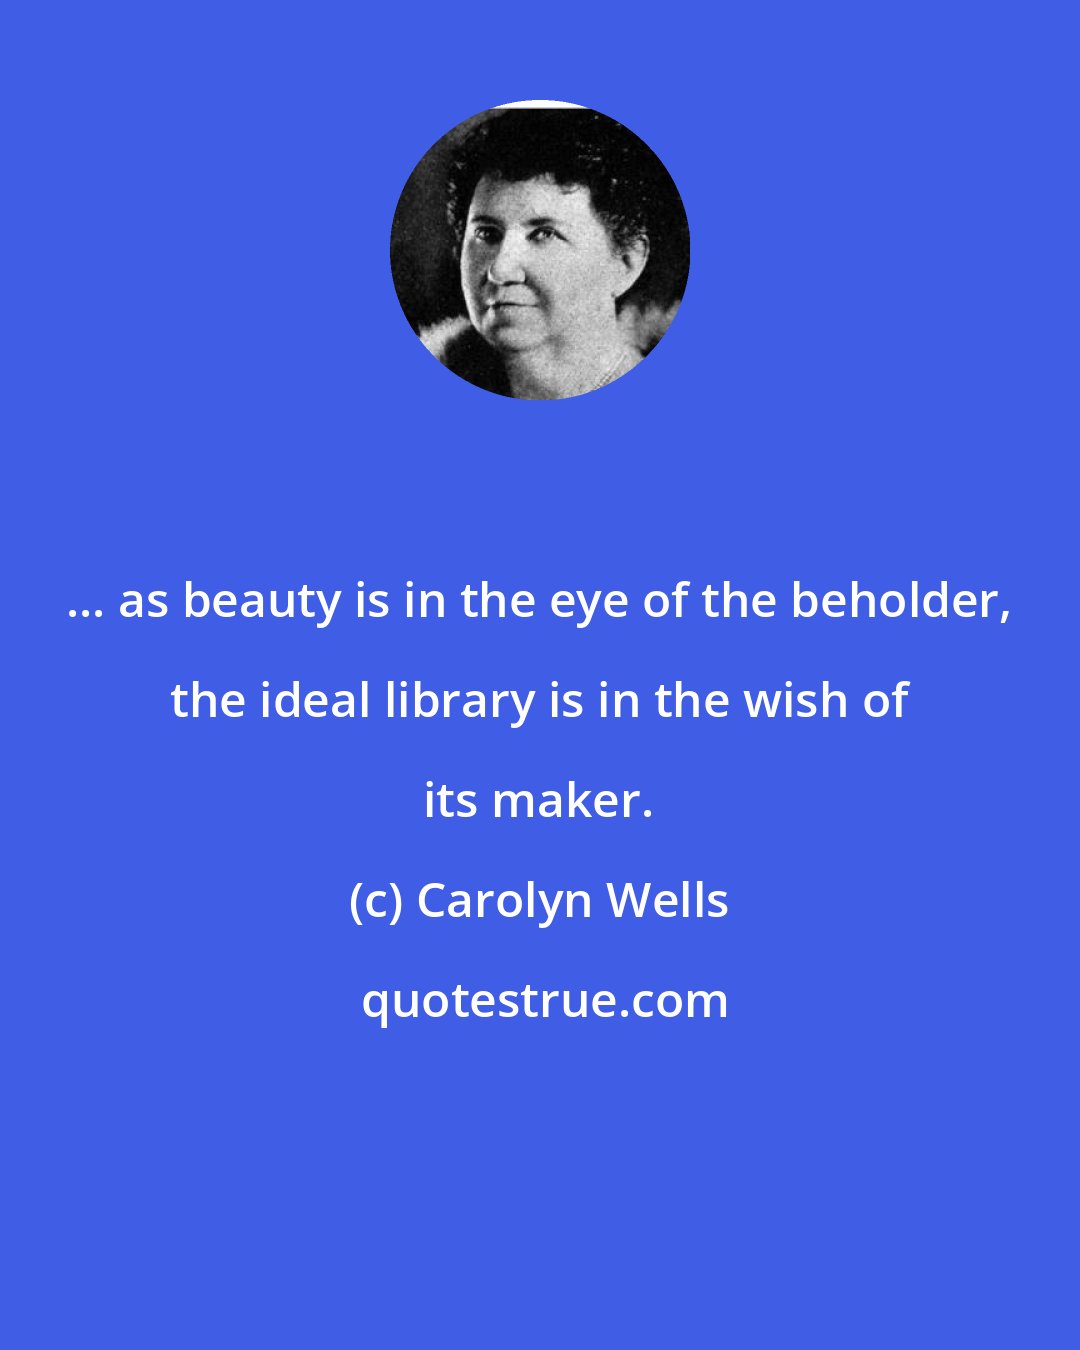 Carolyn Wells: ... as beauty is in the eye of the beholder, the ideal library is in the wish of its maker.